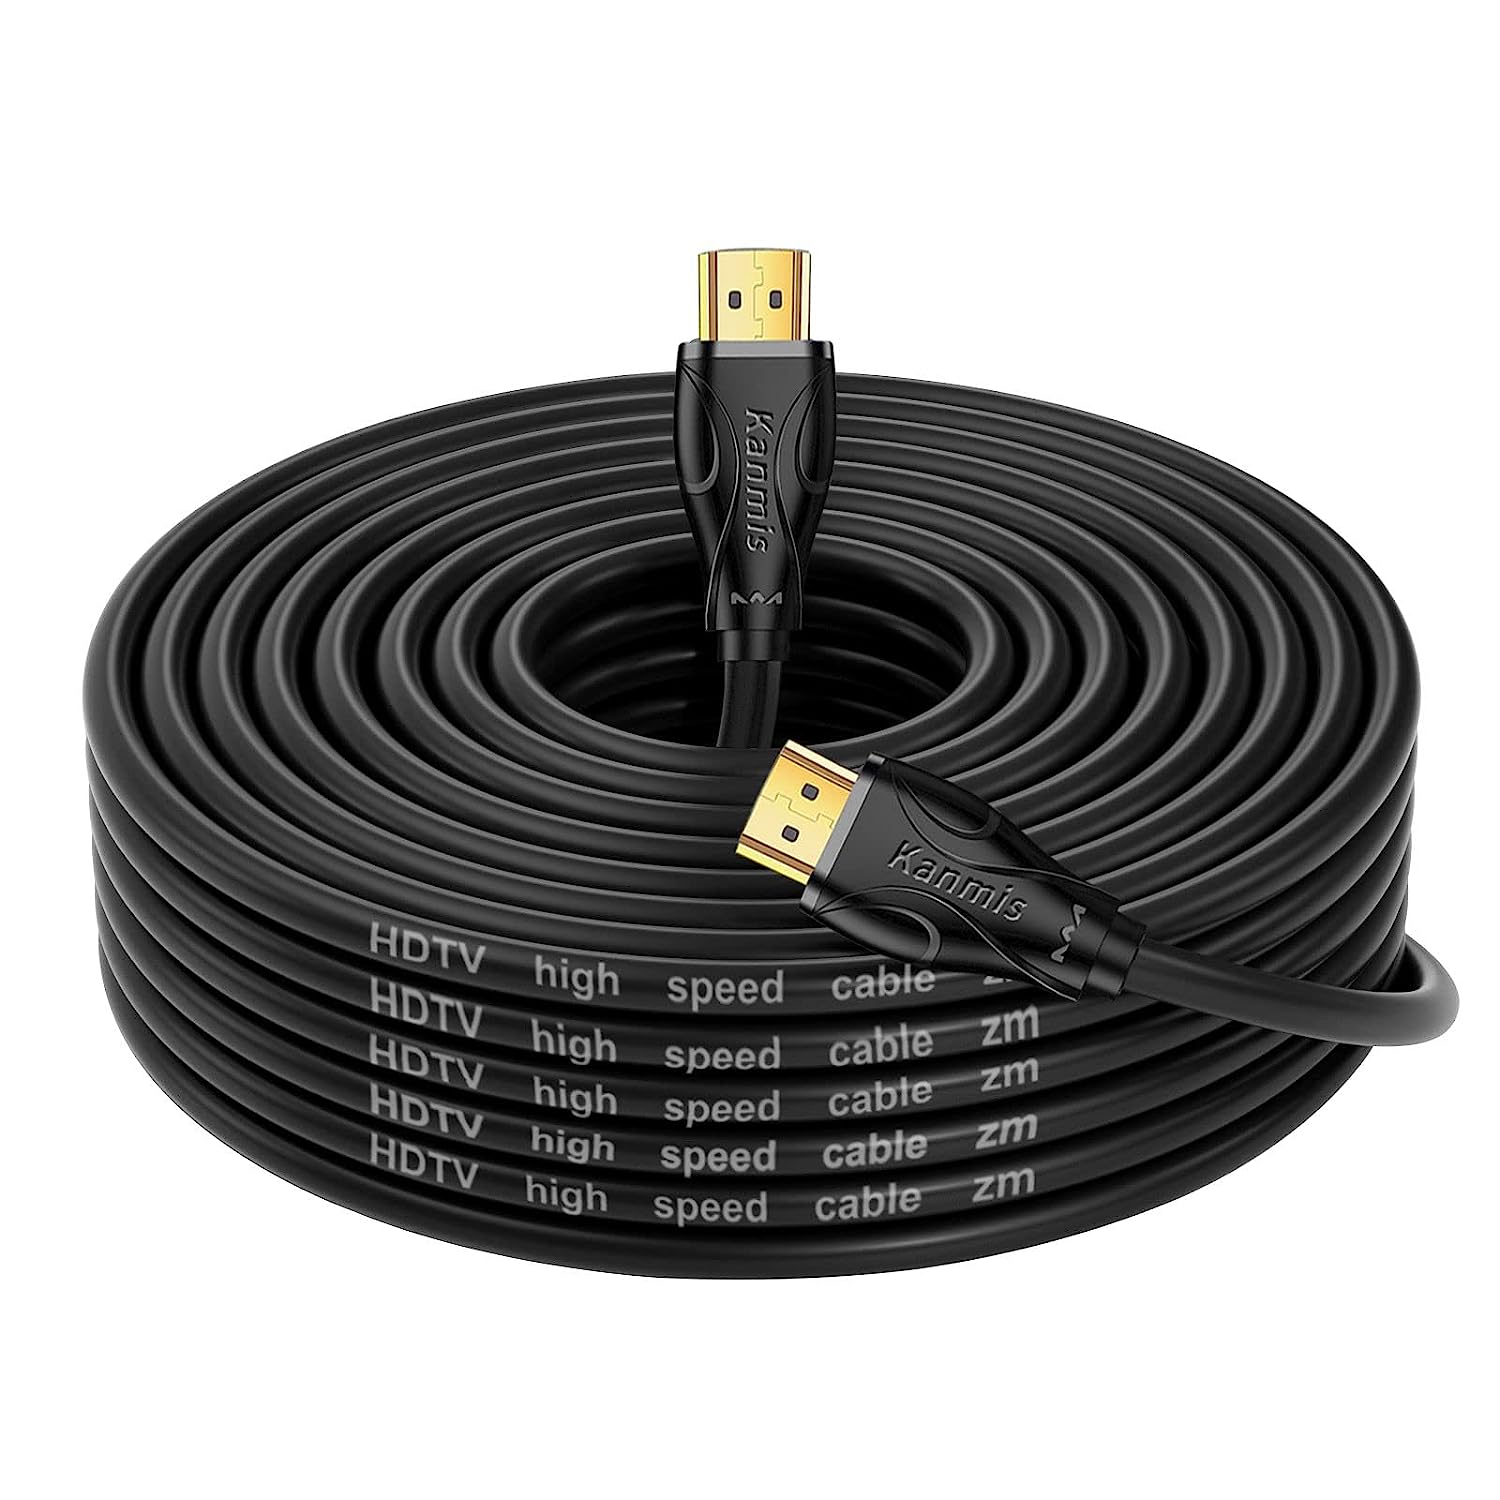 4K HDMI Cable 25ft, High Speed Hdmi Cables [...]